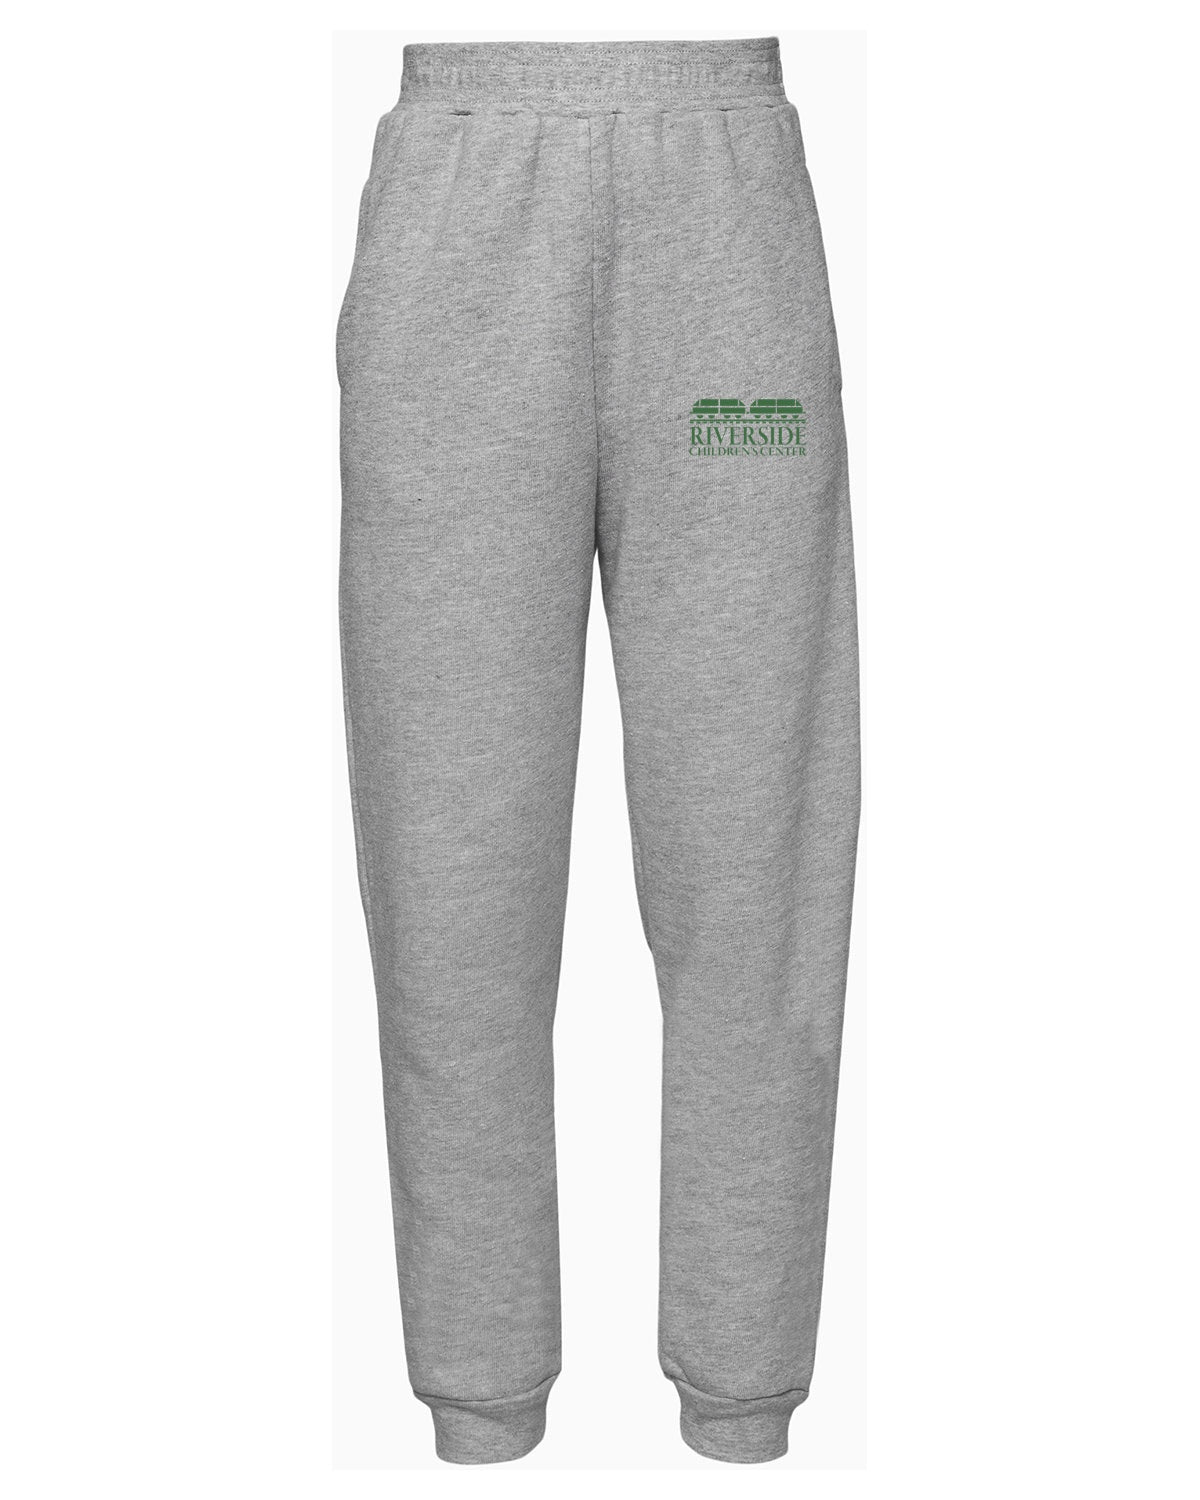 Riverside Youth Jogger Sweatpant (3727Y)